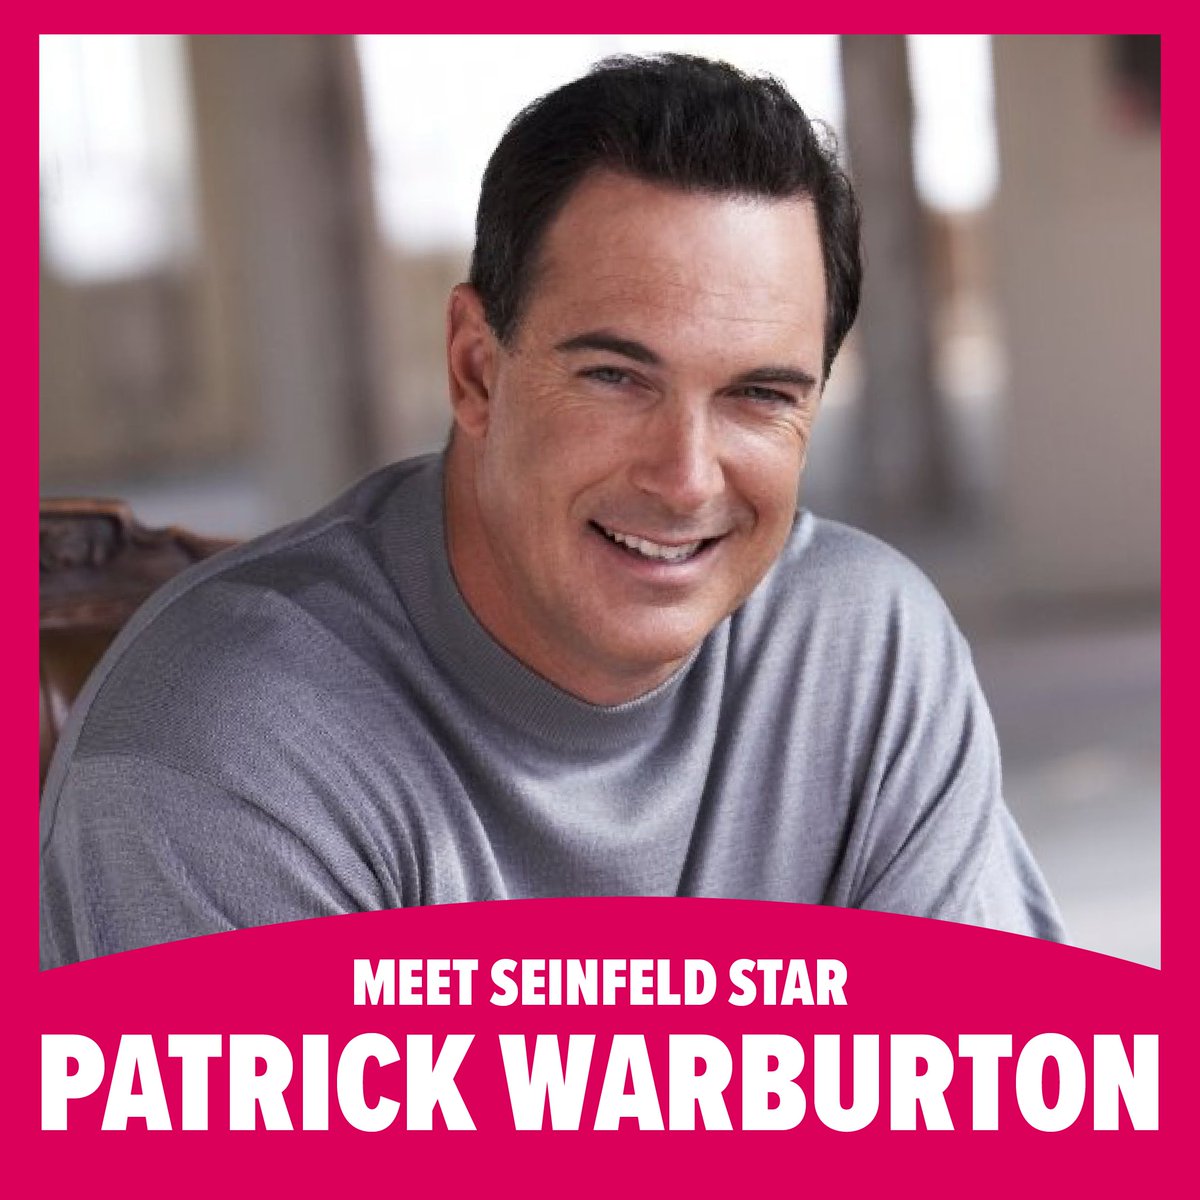 Don't worry, he's not going to paint his face, probably. Meet Patrick Warburton (Puddy) from #Seinfeld at #FANEXPOChicago this August. Get your #tickets now: spr.ly/6014bRamy